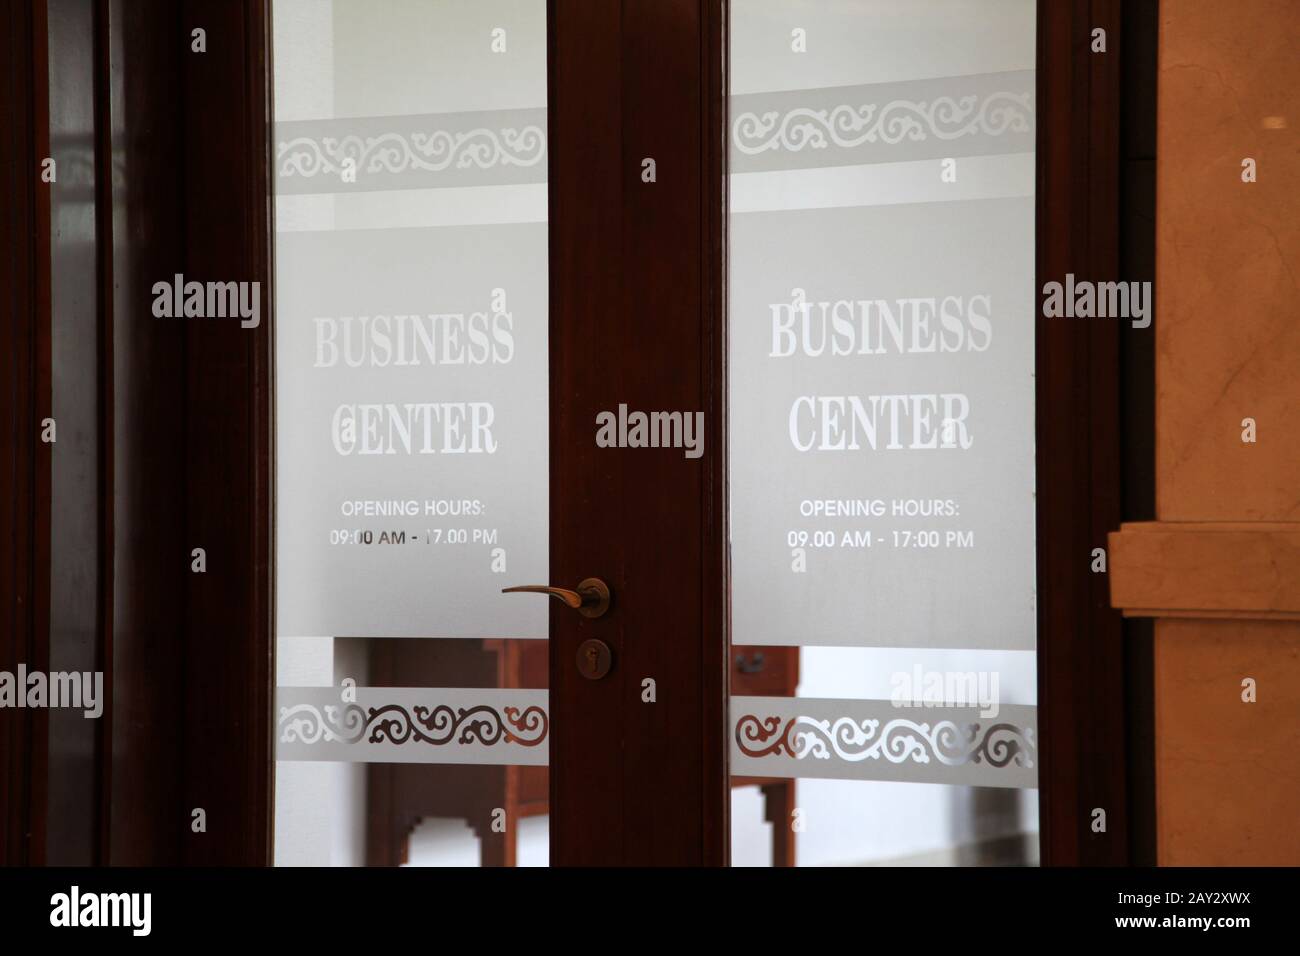 Entrance door of a Business centre in a hotel or mall or company Stock Photo